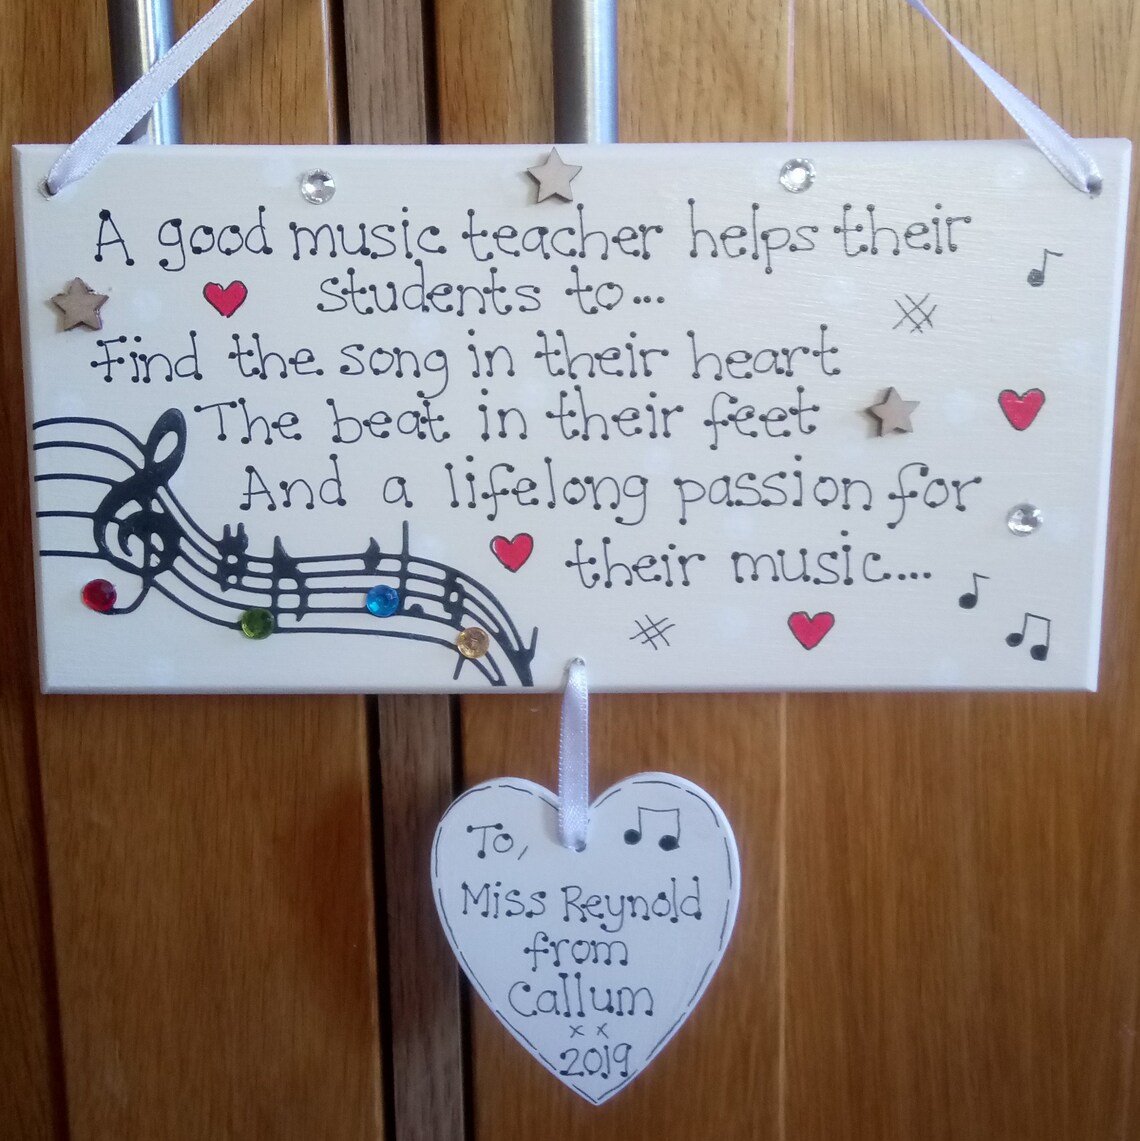 Music is a work of heart - a gift for a teacher that teaches from the heart!
#music #teacher #giftsforteachers #gifthour #bizhour #handmade #creative #smartnetworking #craft
etsy.me/3ZcsB72 via @Etsy